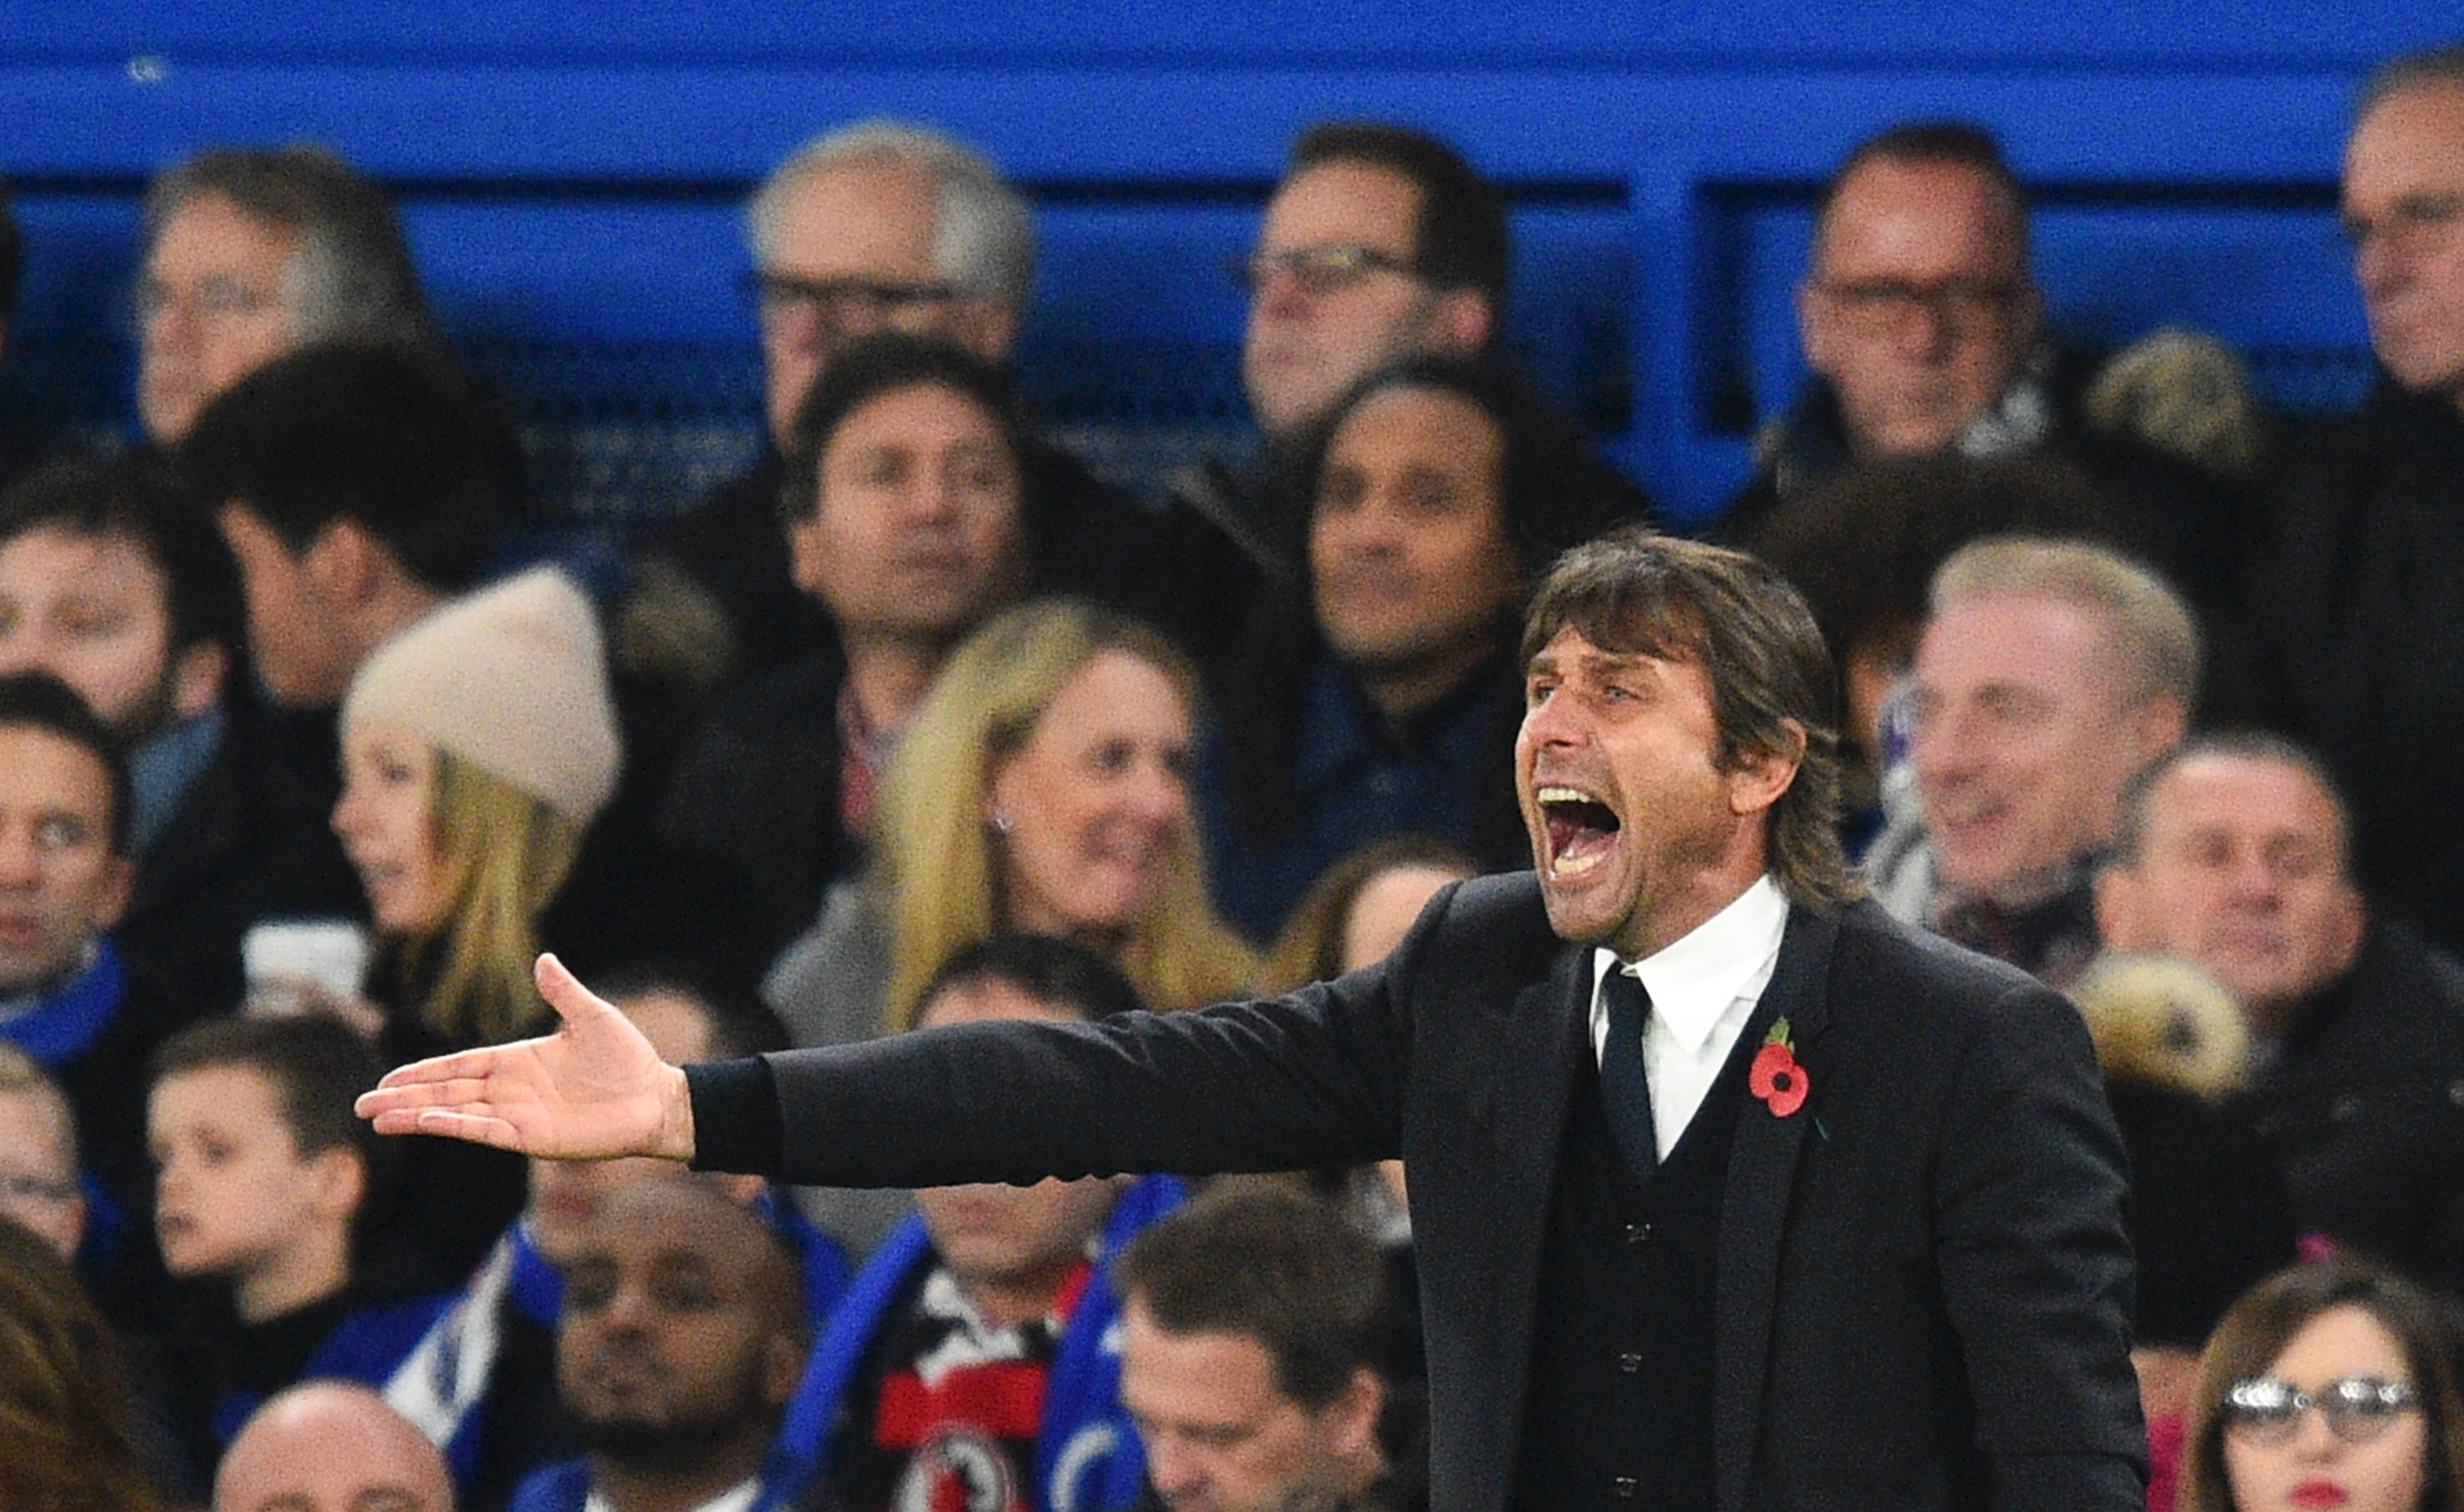 Chelsea's Italian head coach Antonio Conte gestures on the touchline during the English Premier League football match between Chelsea and Everton at Stamford Bridge in London on November 5, 2016. / AFP / Glyn KIRK / RESTRICTED TO EDITORIAL USE. No use with unauthorized audio, video, data, fixture lists, club/league logos or 'live' services. Online in-match use limited to 75 images, no video emulation. No use in betting, games or single club/league/player publications.  /         (Photo credit should read GLYN KIRK/AFP/Getty Images)